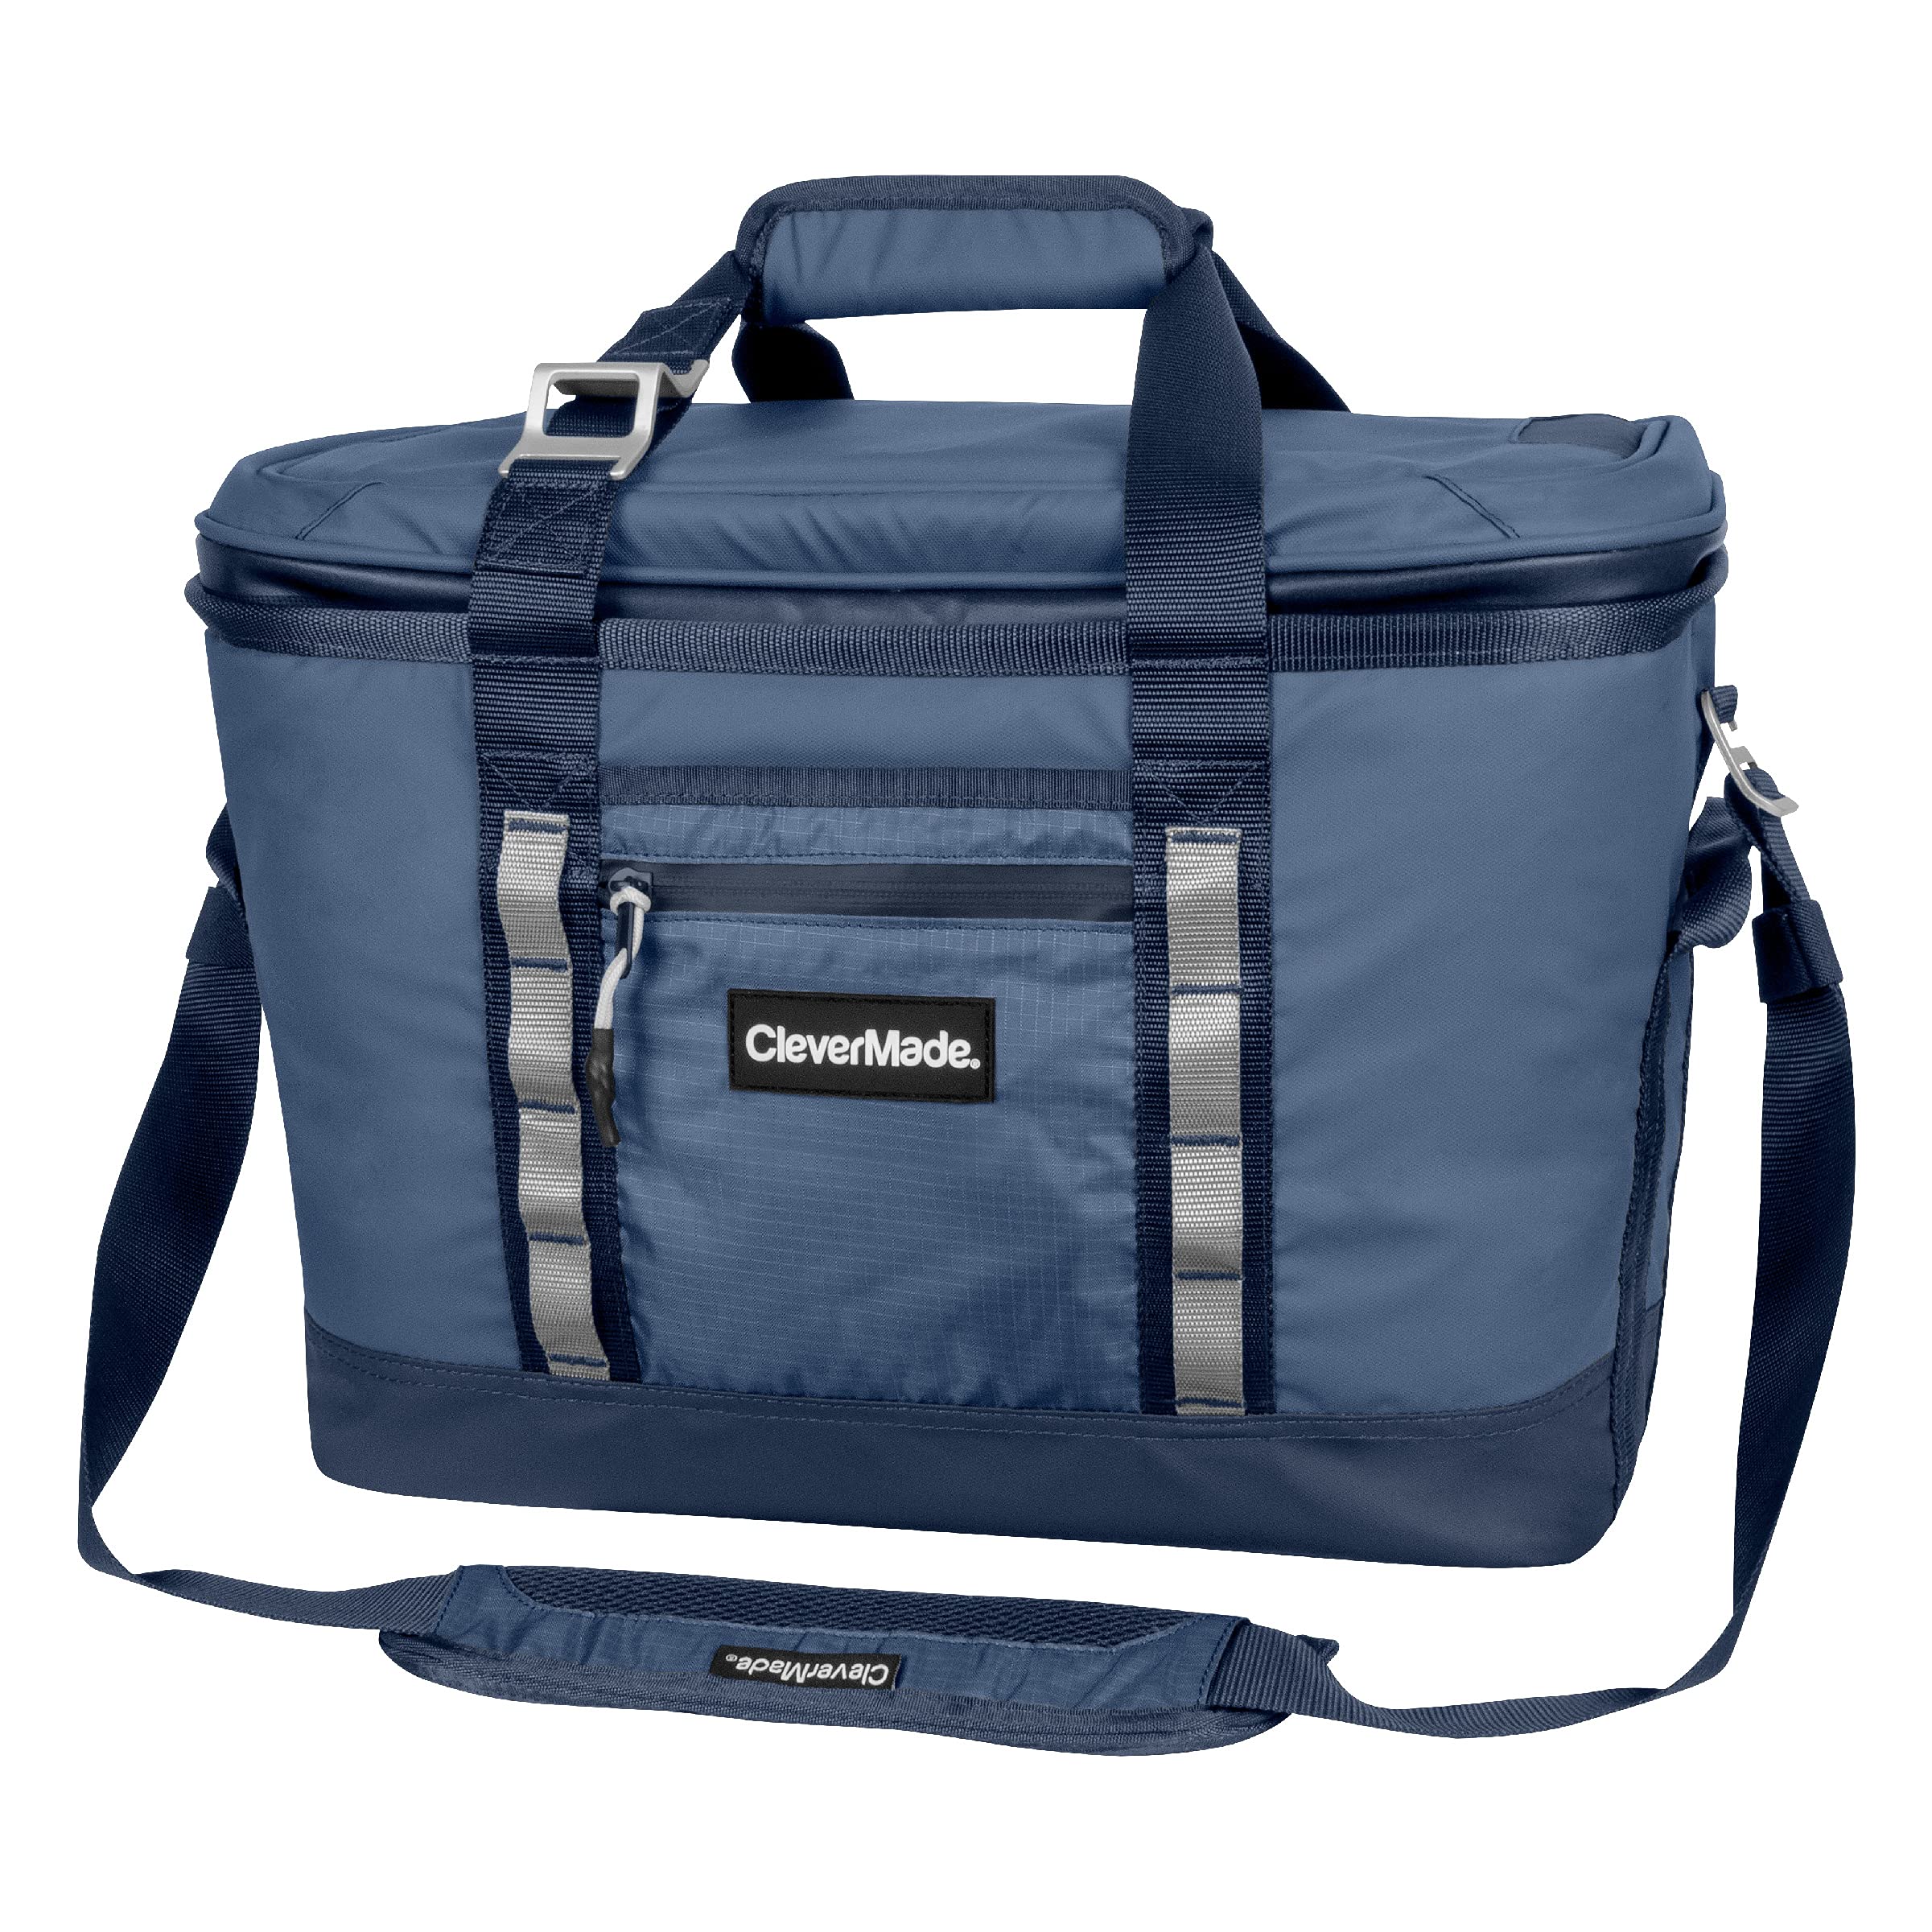 50-Can CleverMade Maverick Collapsible Cooler Bag w/ Shoulder Strap & Bottle Opener (Navy, Gray) $30 + Free Shipping w/ Prime or $35+ orders